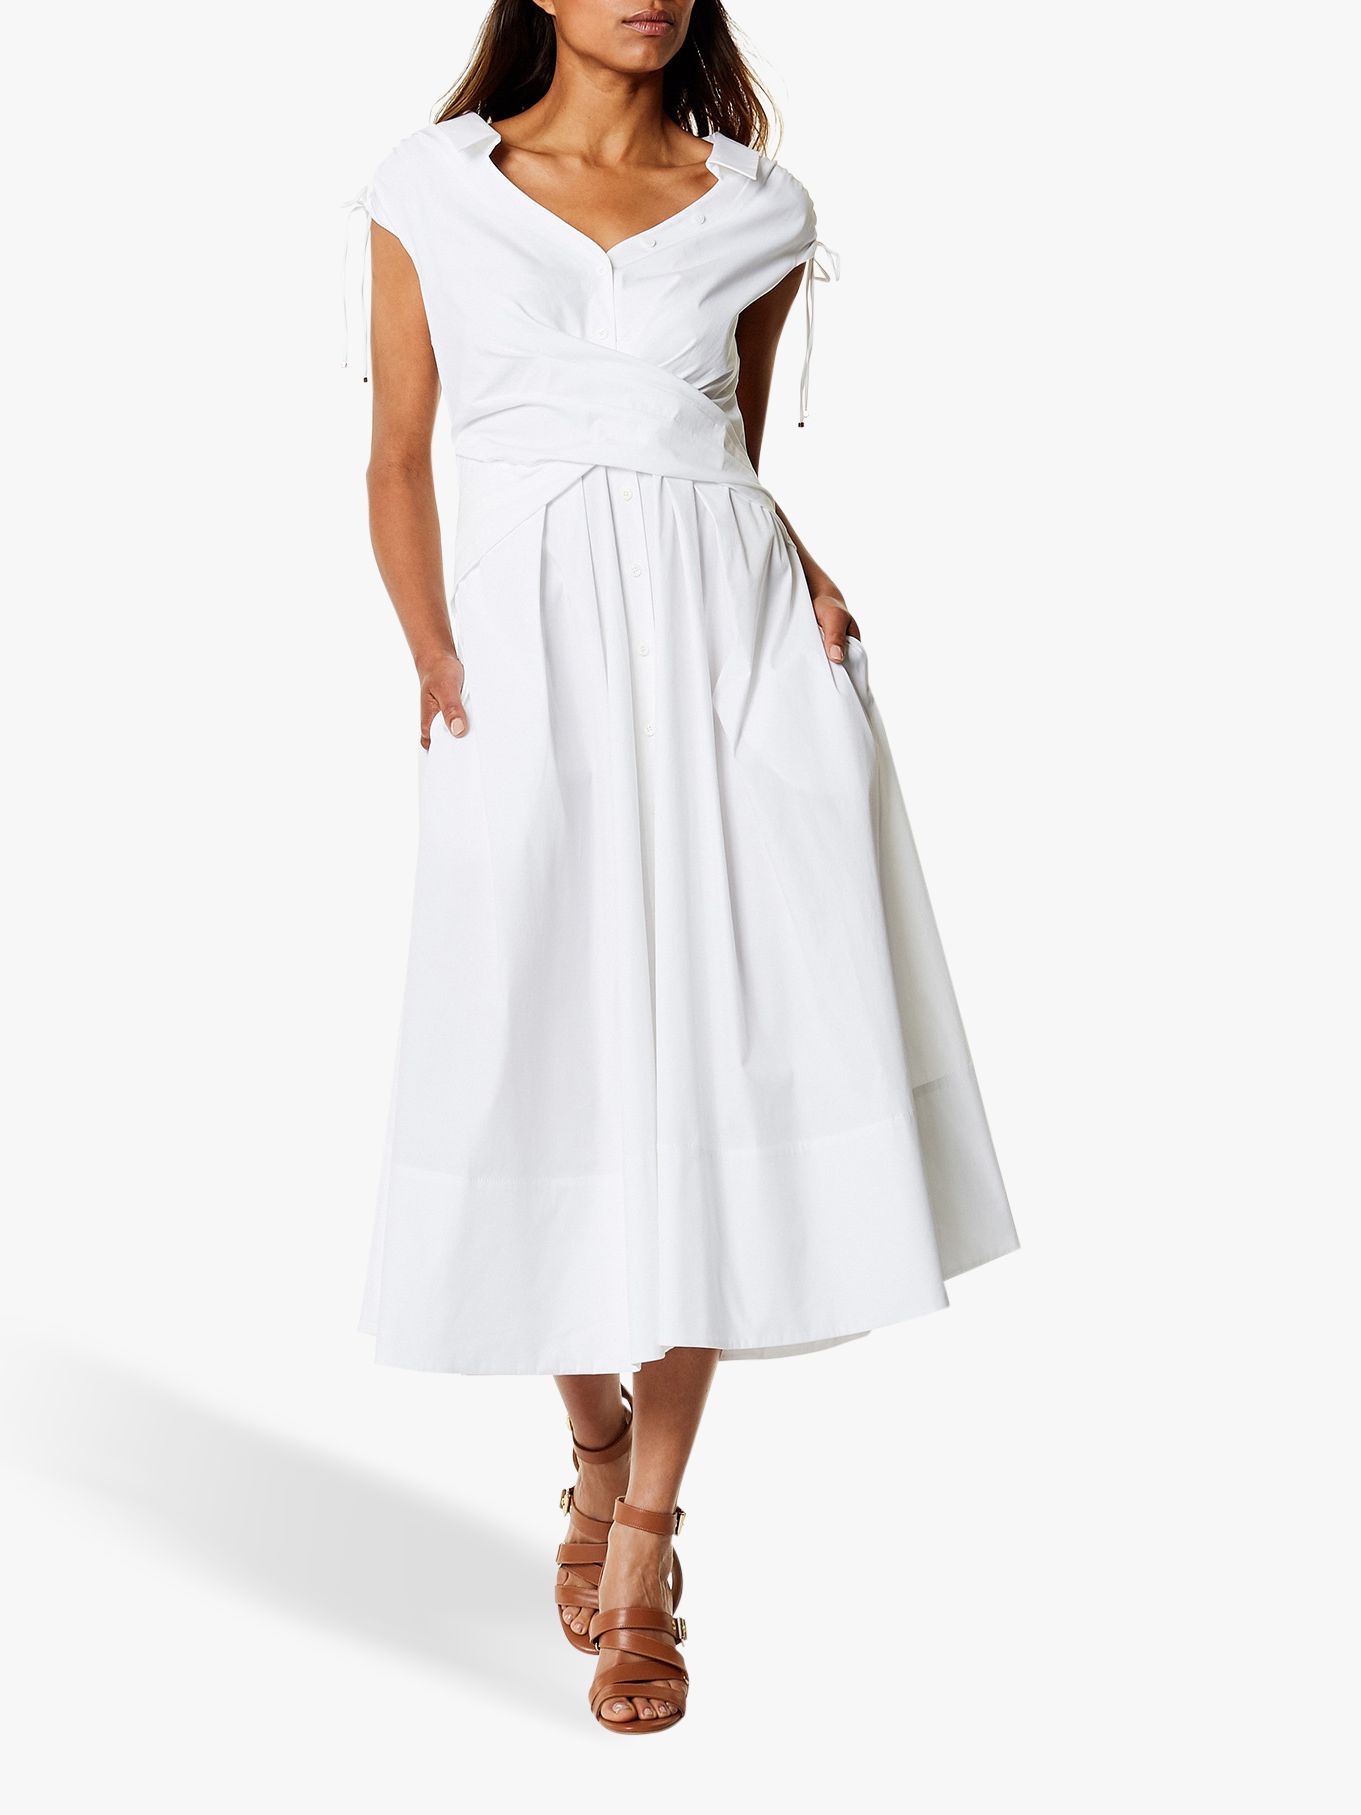 white flowing dress